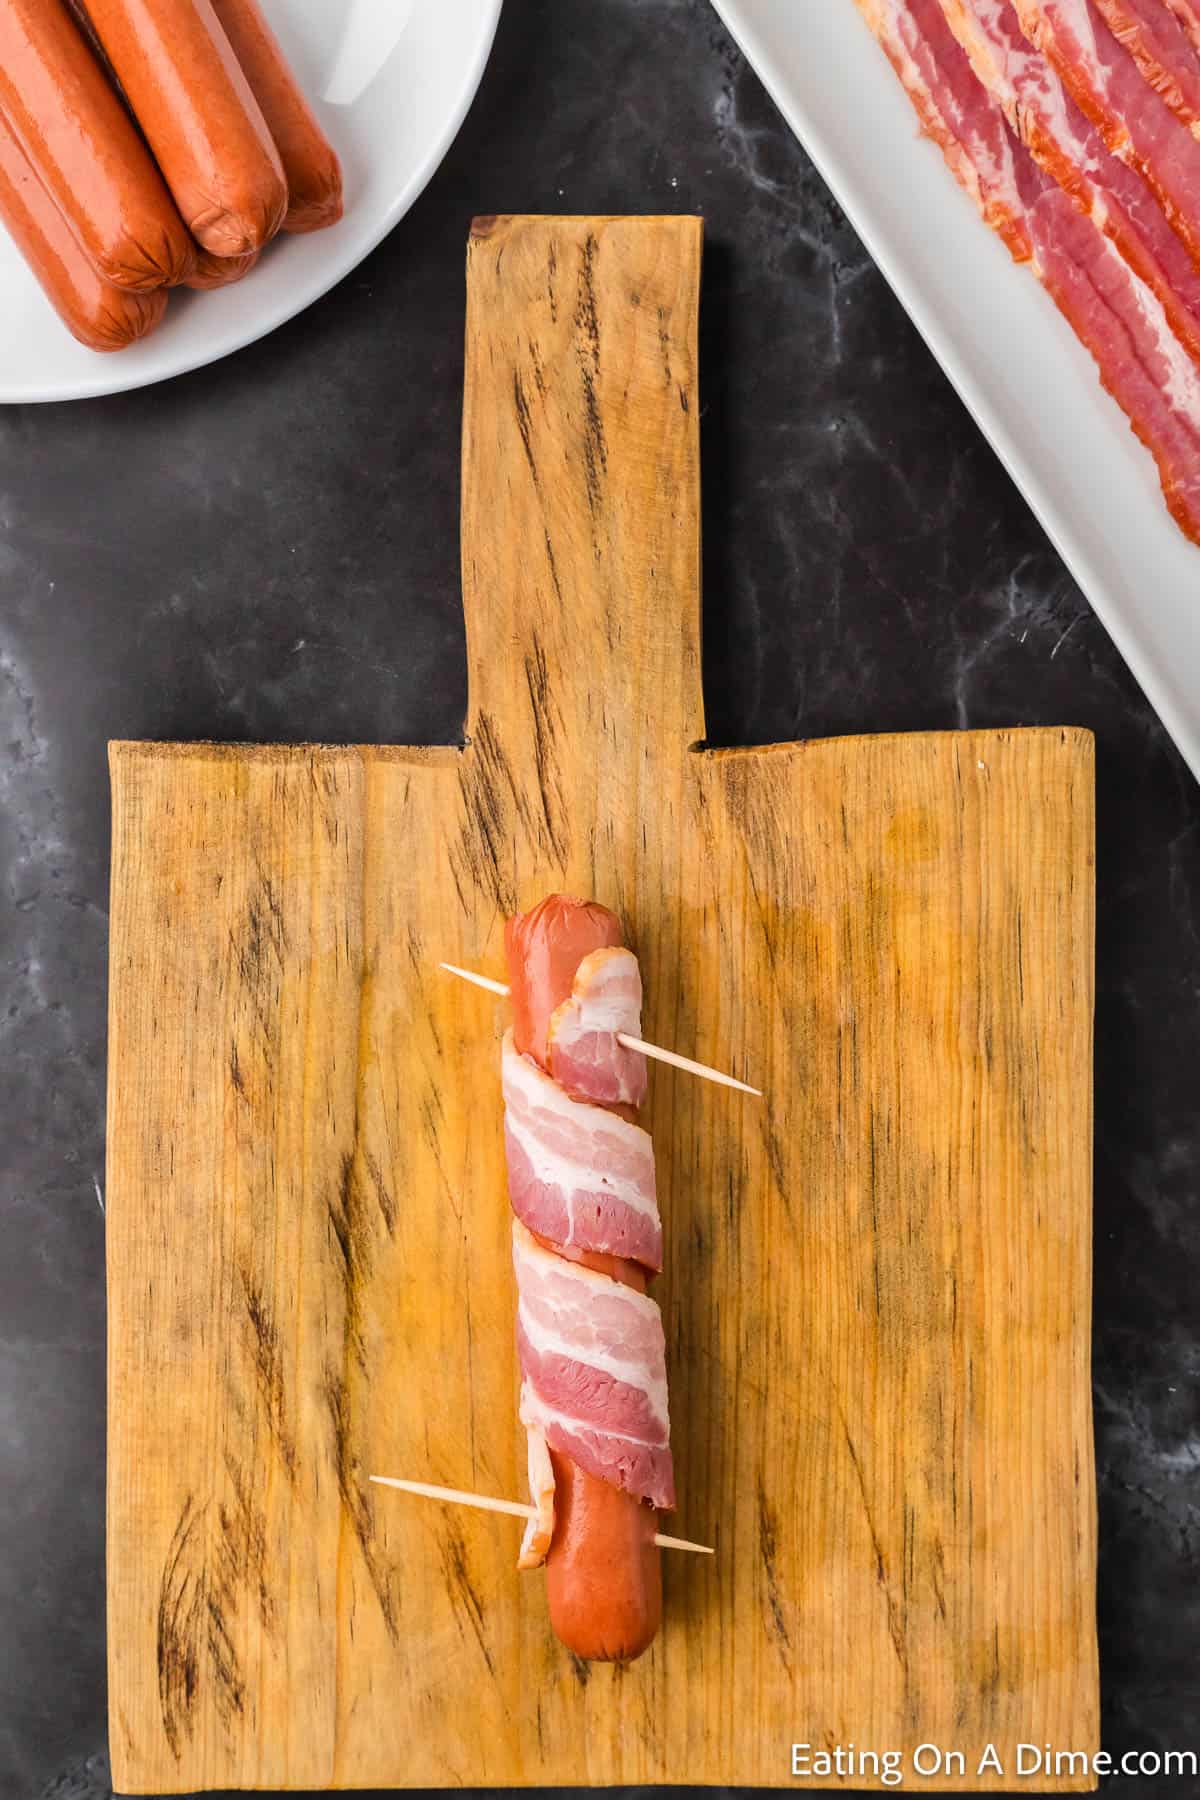 Wrapping a slice of bacon around a hot dogs and securing with toothpicks